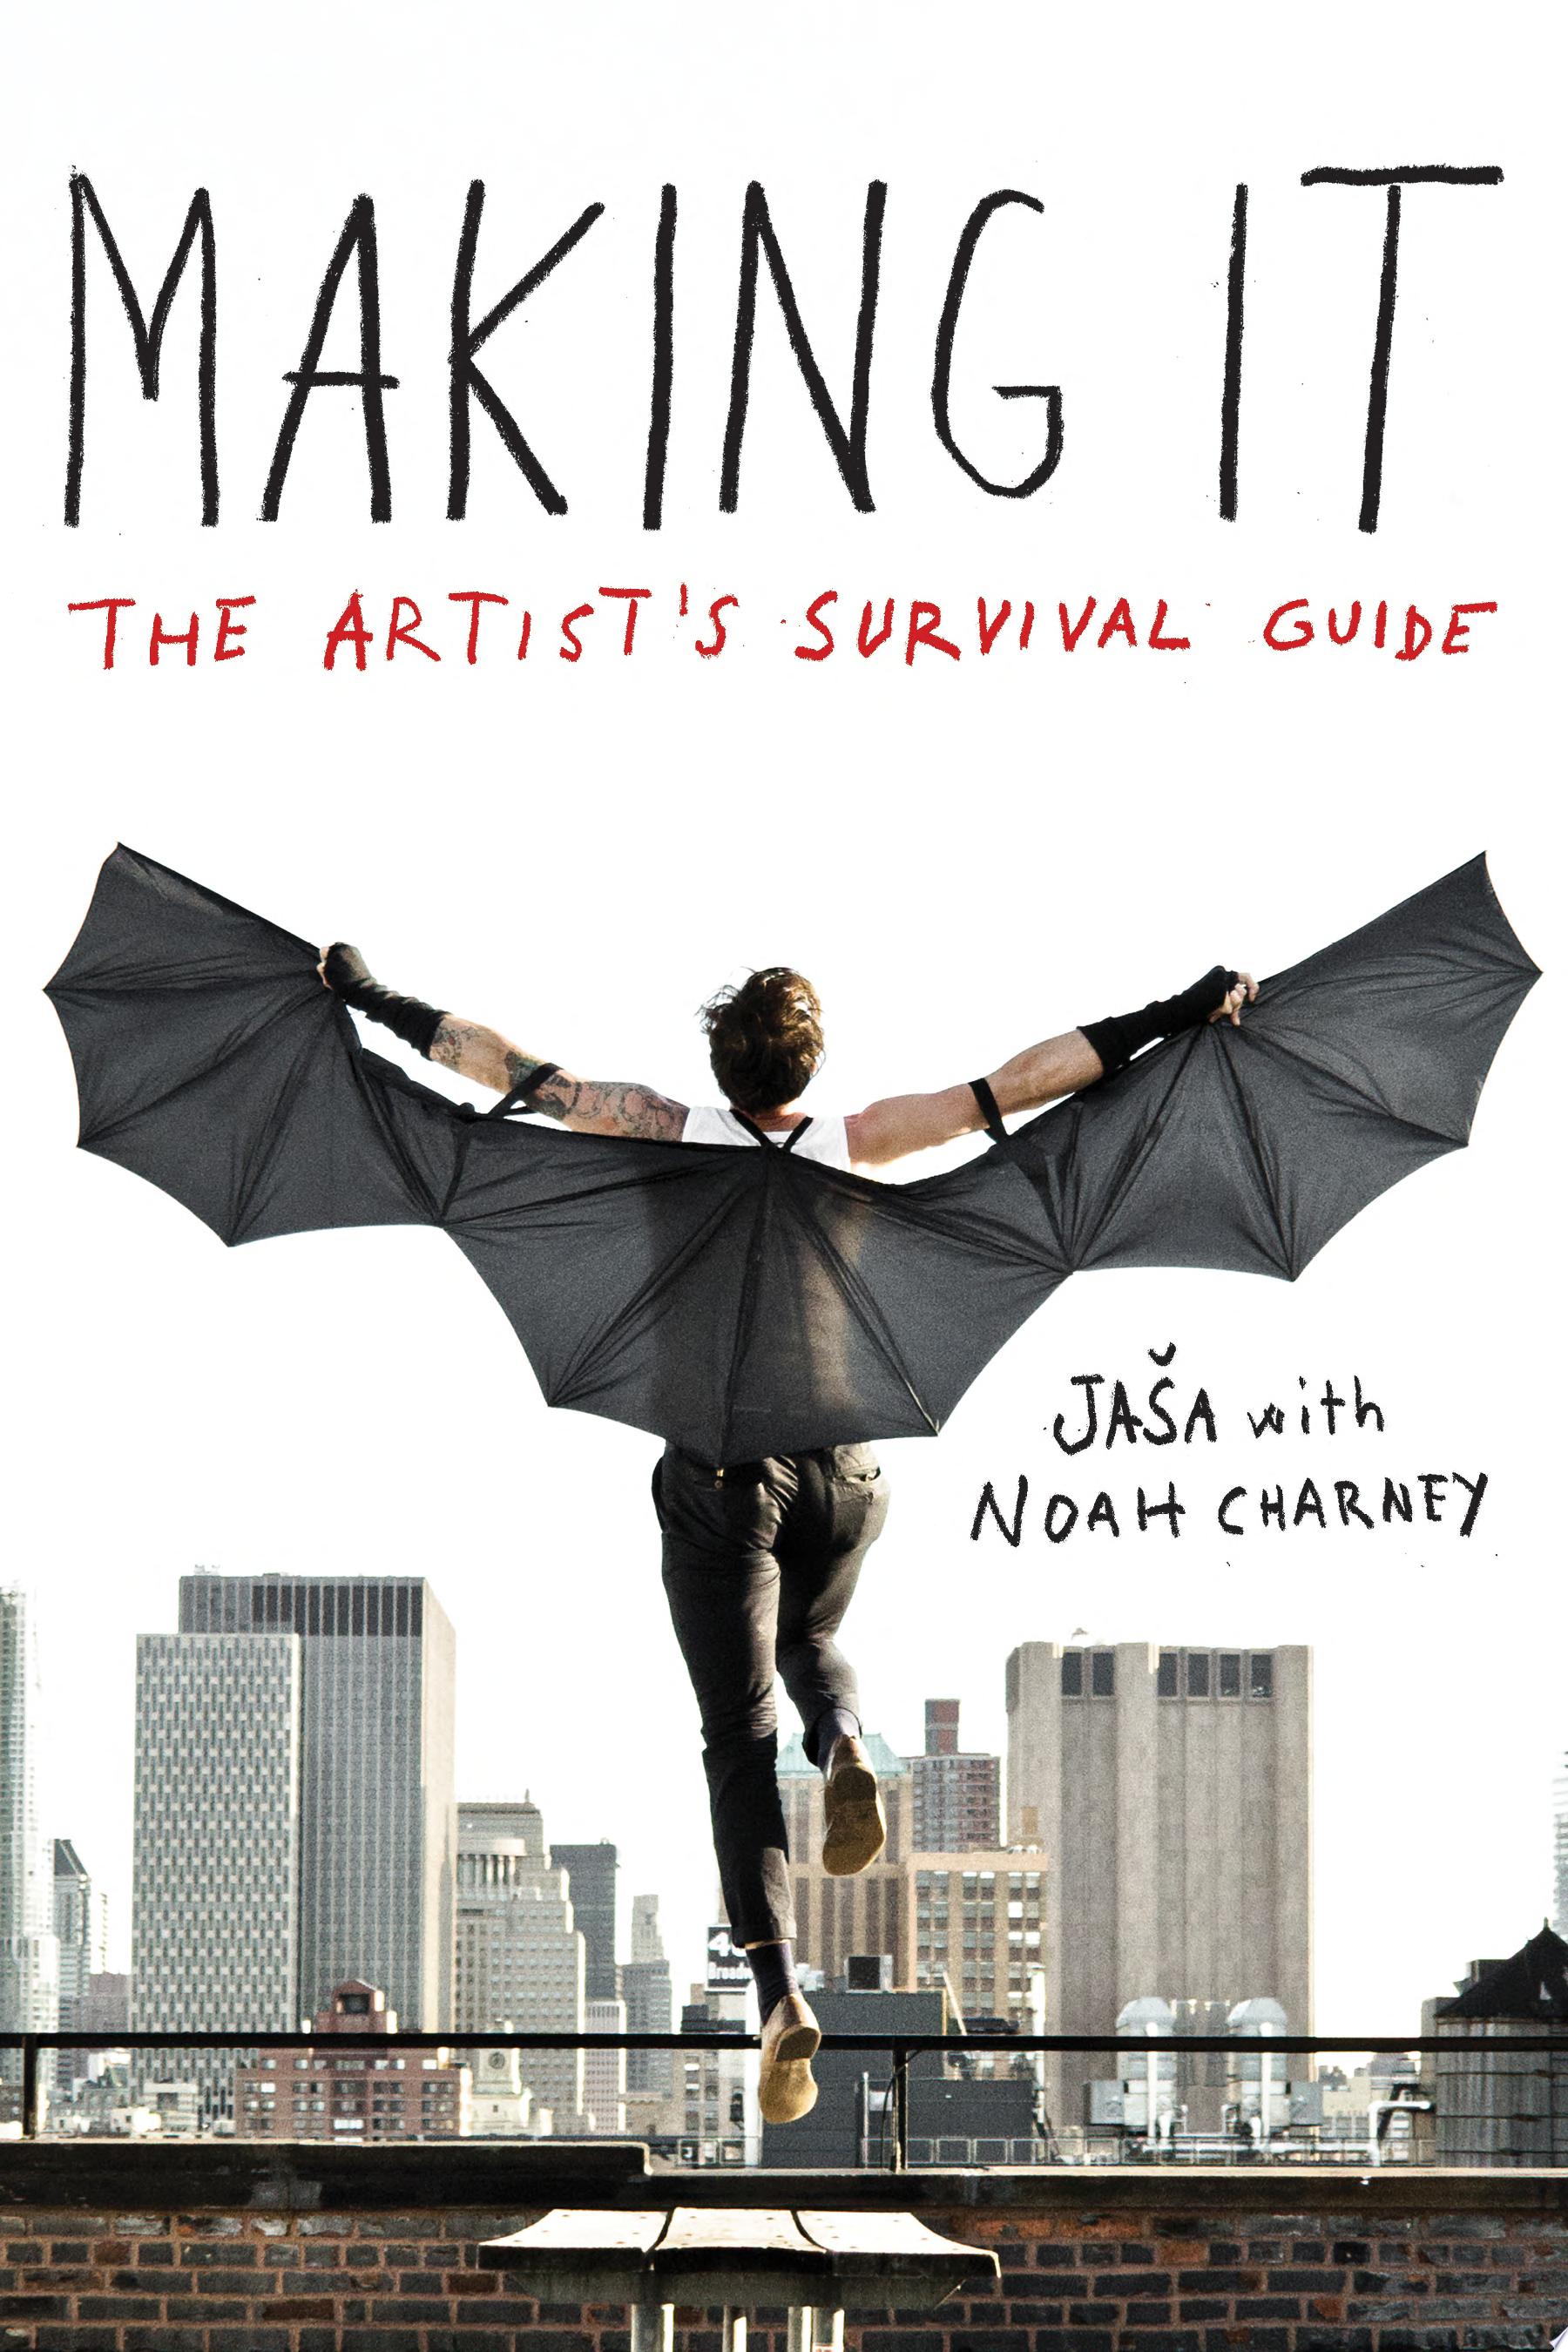 Image for "Making It"